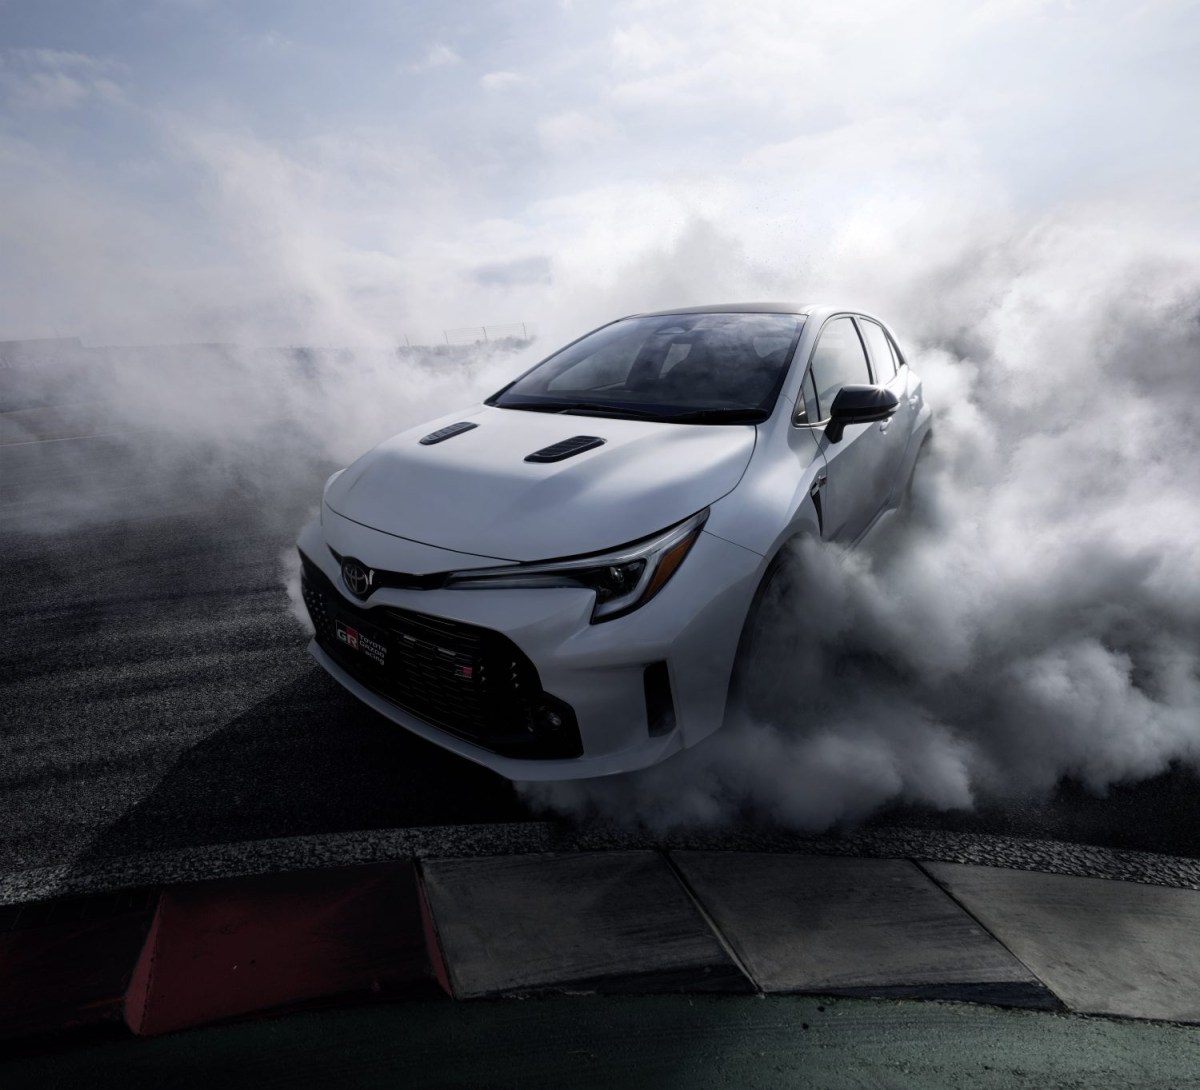 A white Toyota GR Corolla doing a burnout proves that Toyota is one of the coolest car companies.